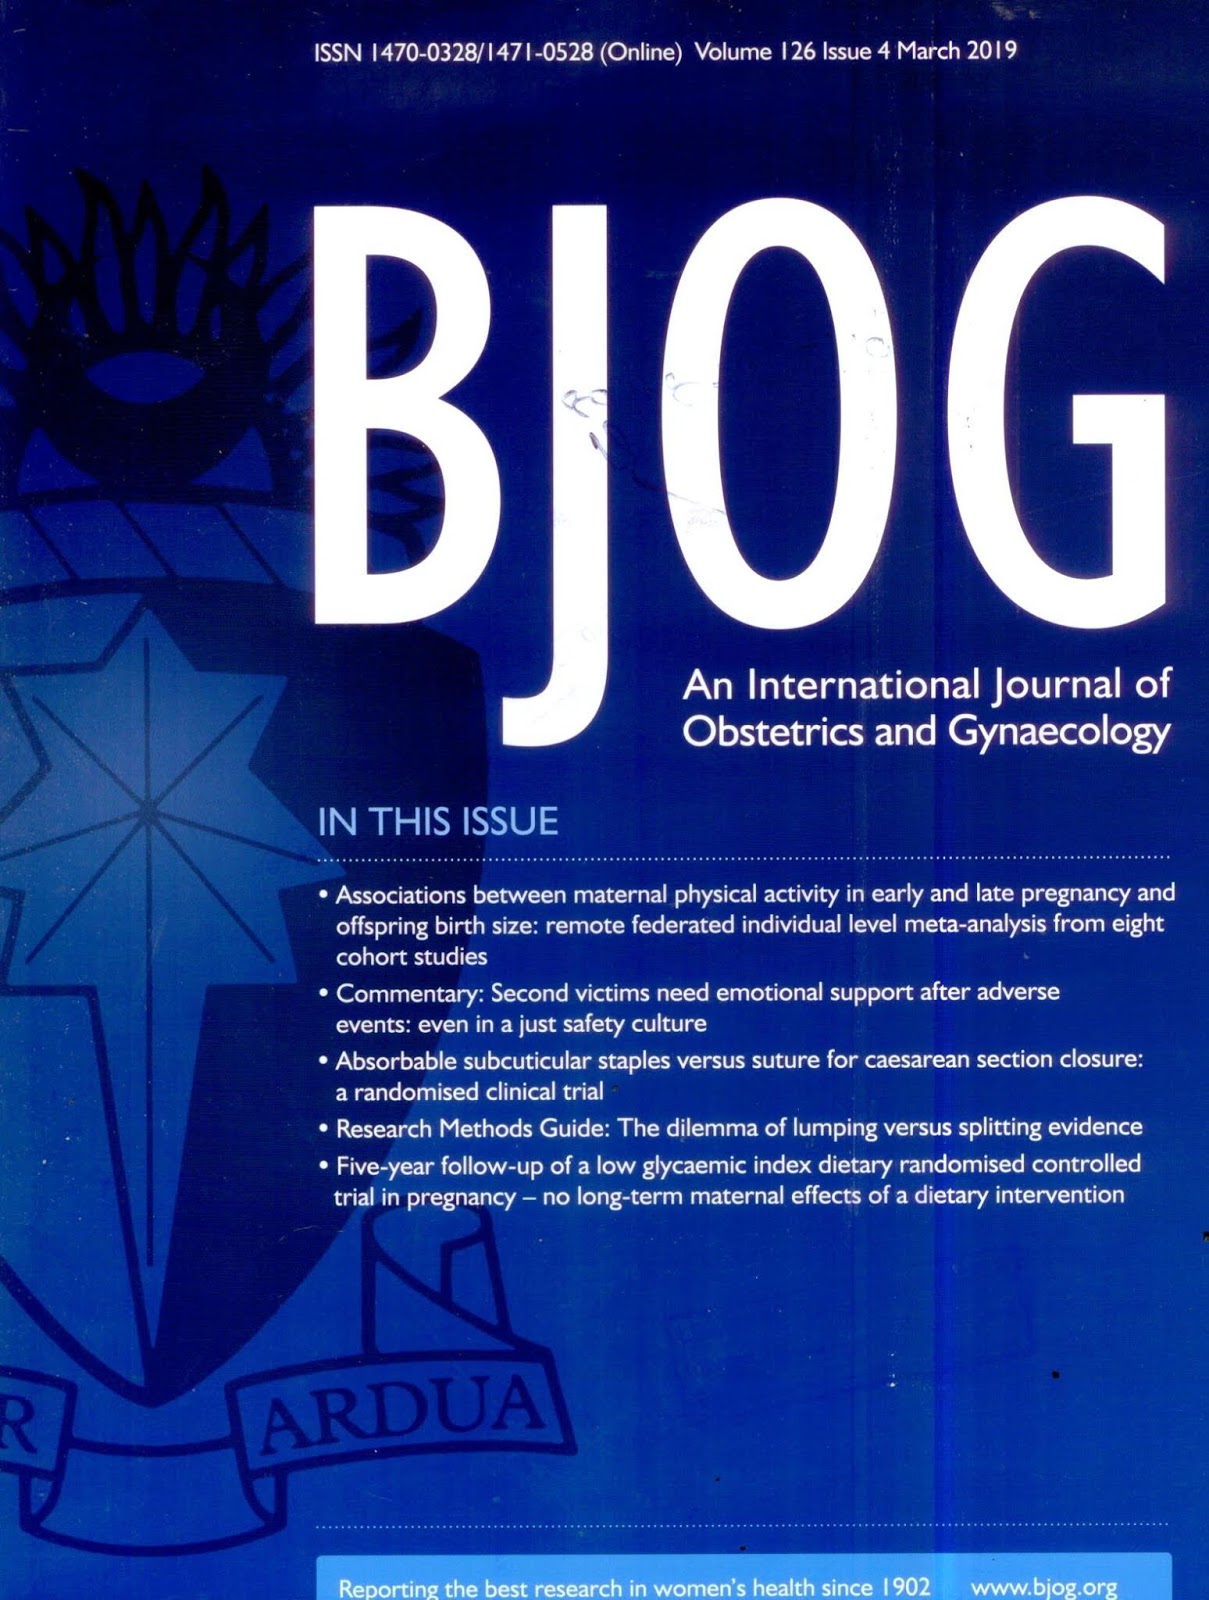 https://obgyn.onlinelibrary.wiley.com/toc/14710528/2019/126/4